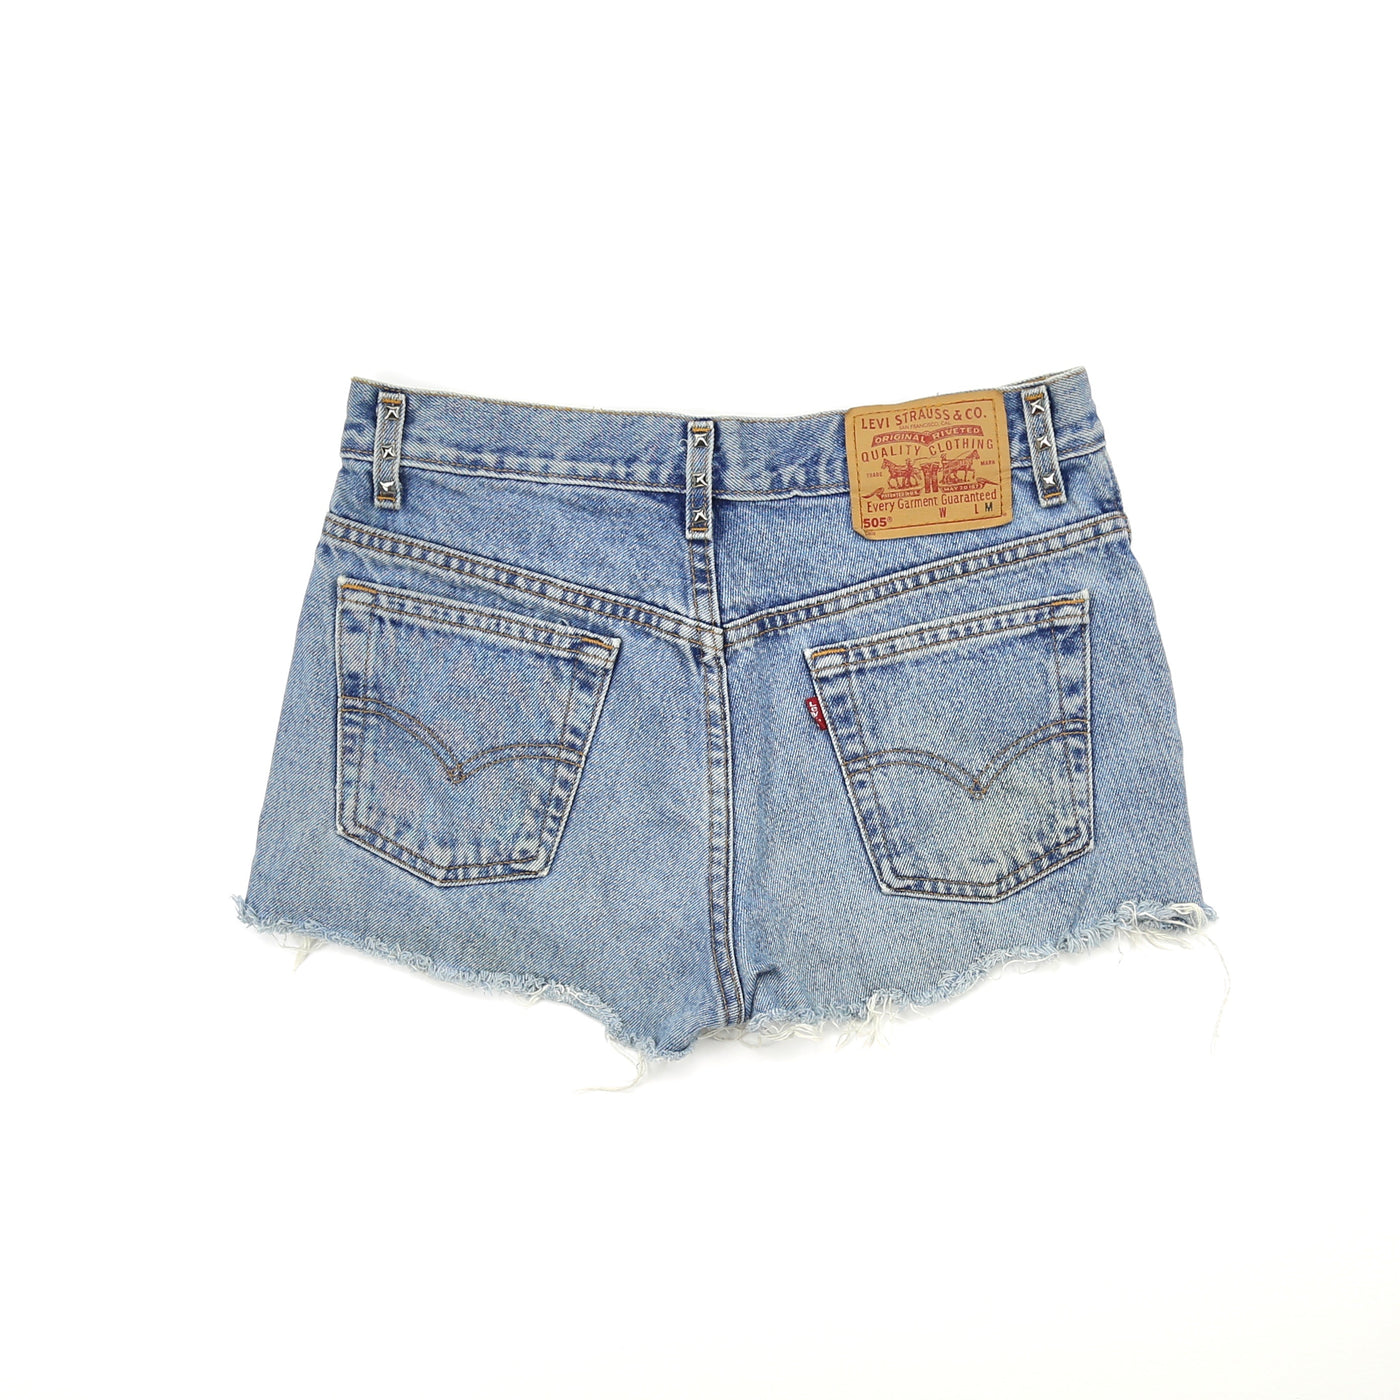 Vintage Levi's 505 Distressed and Studded Shorts